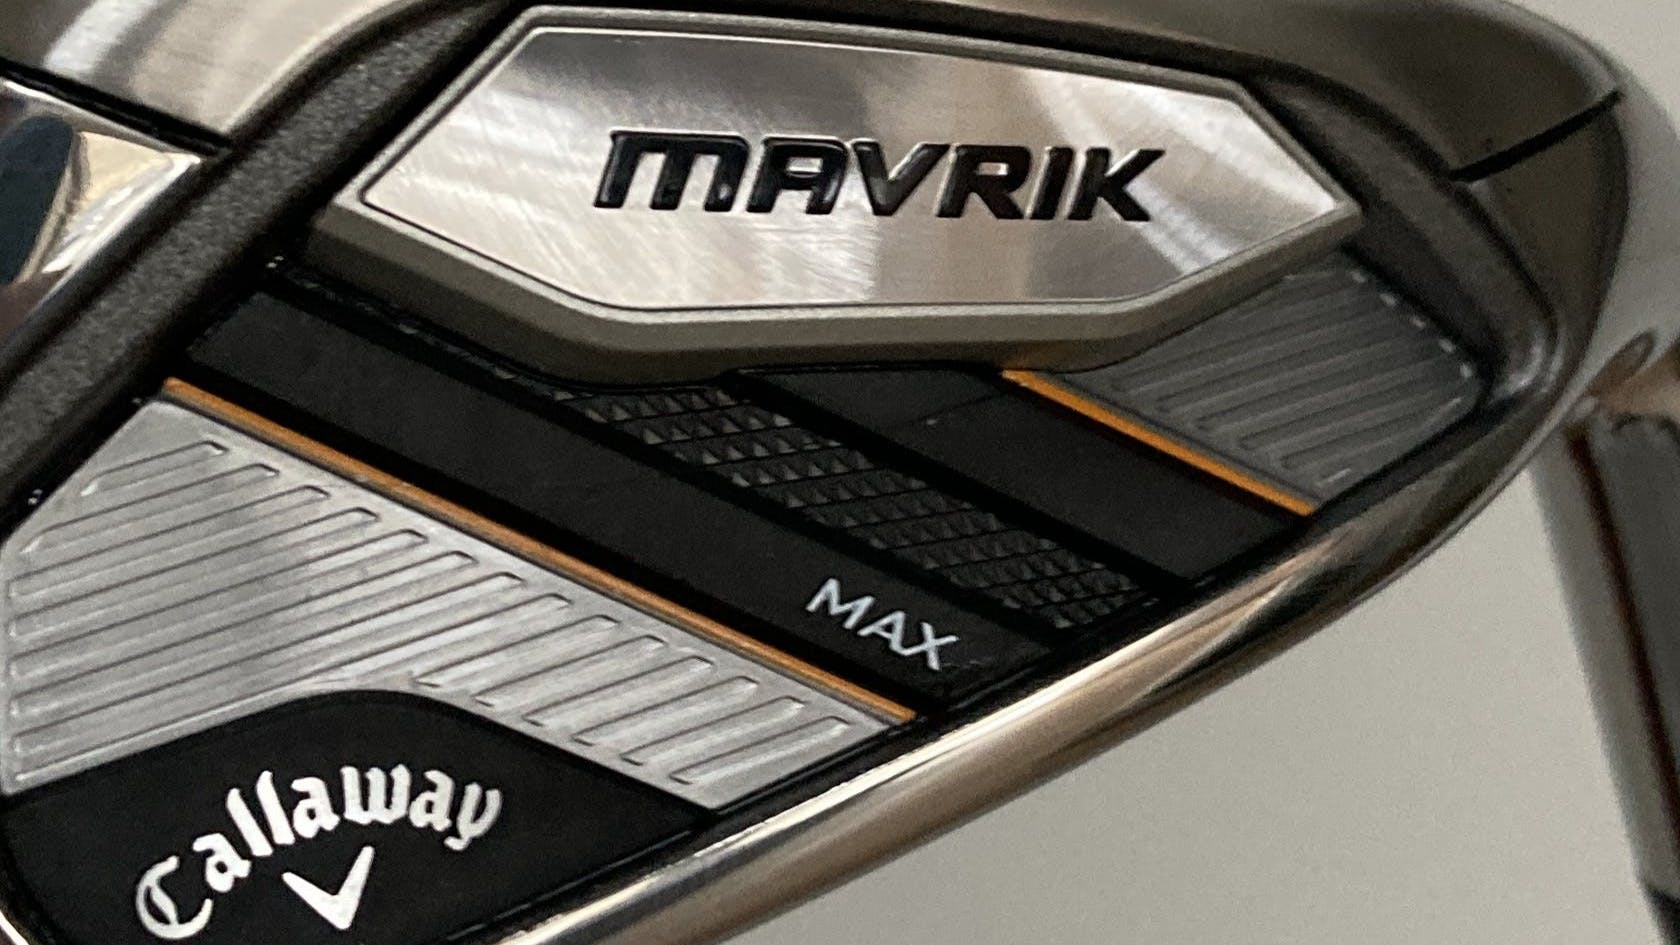 The cap back view of the Mavrik Max 7 iron from Callaway.